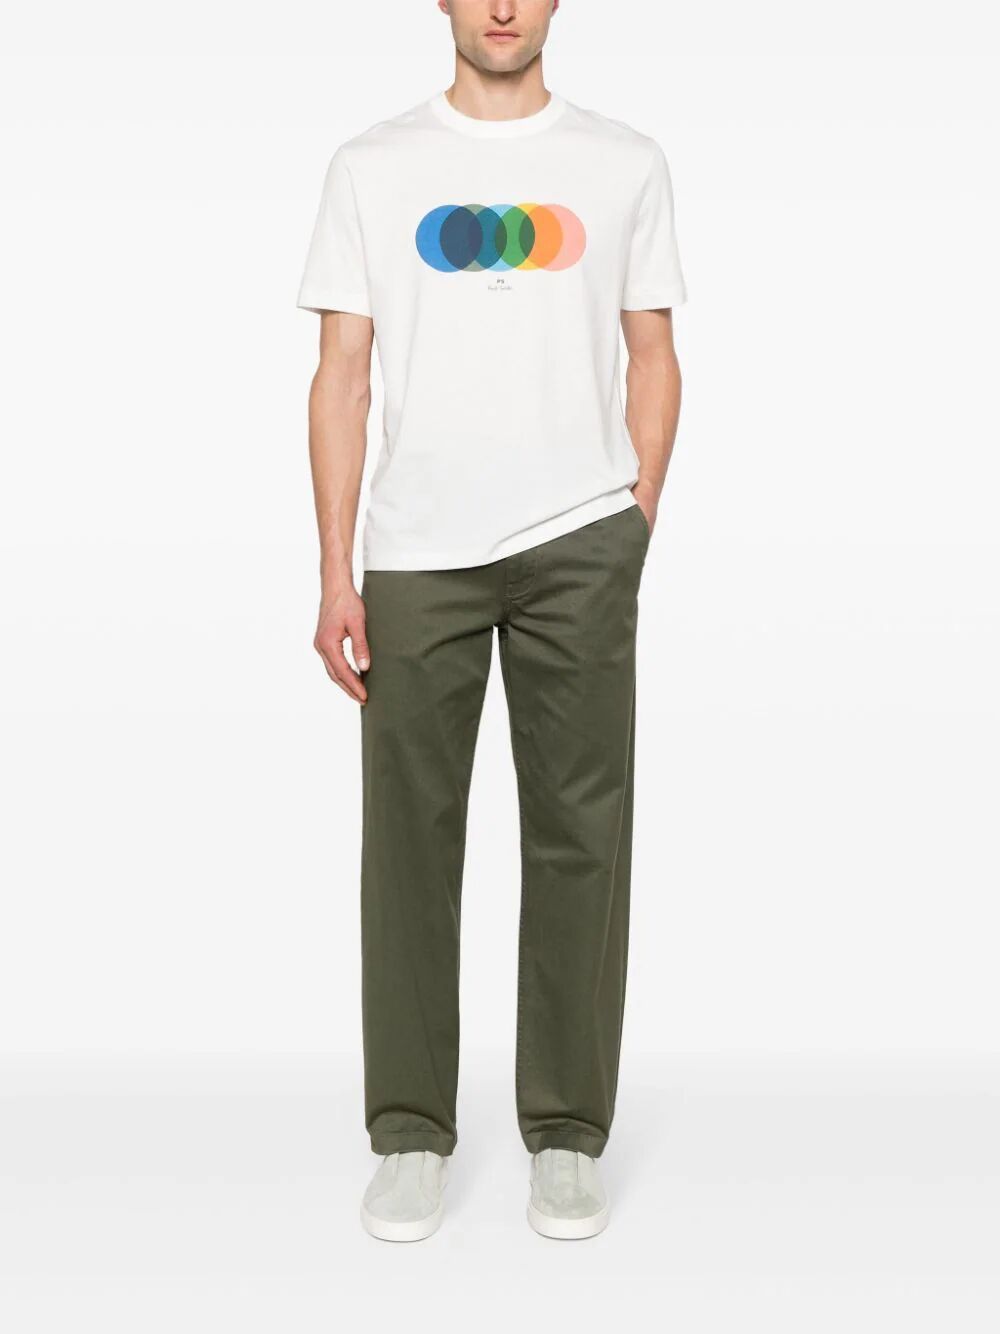 Shop Ps By Paul Smith Mens Ss Tshirt Circles In White